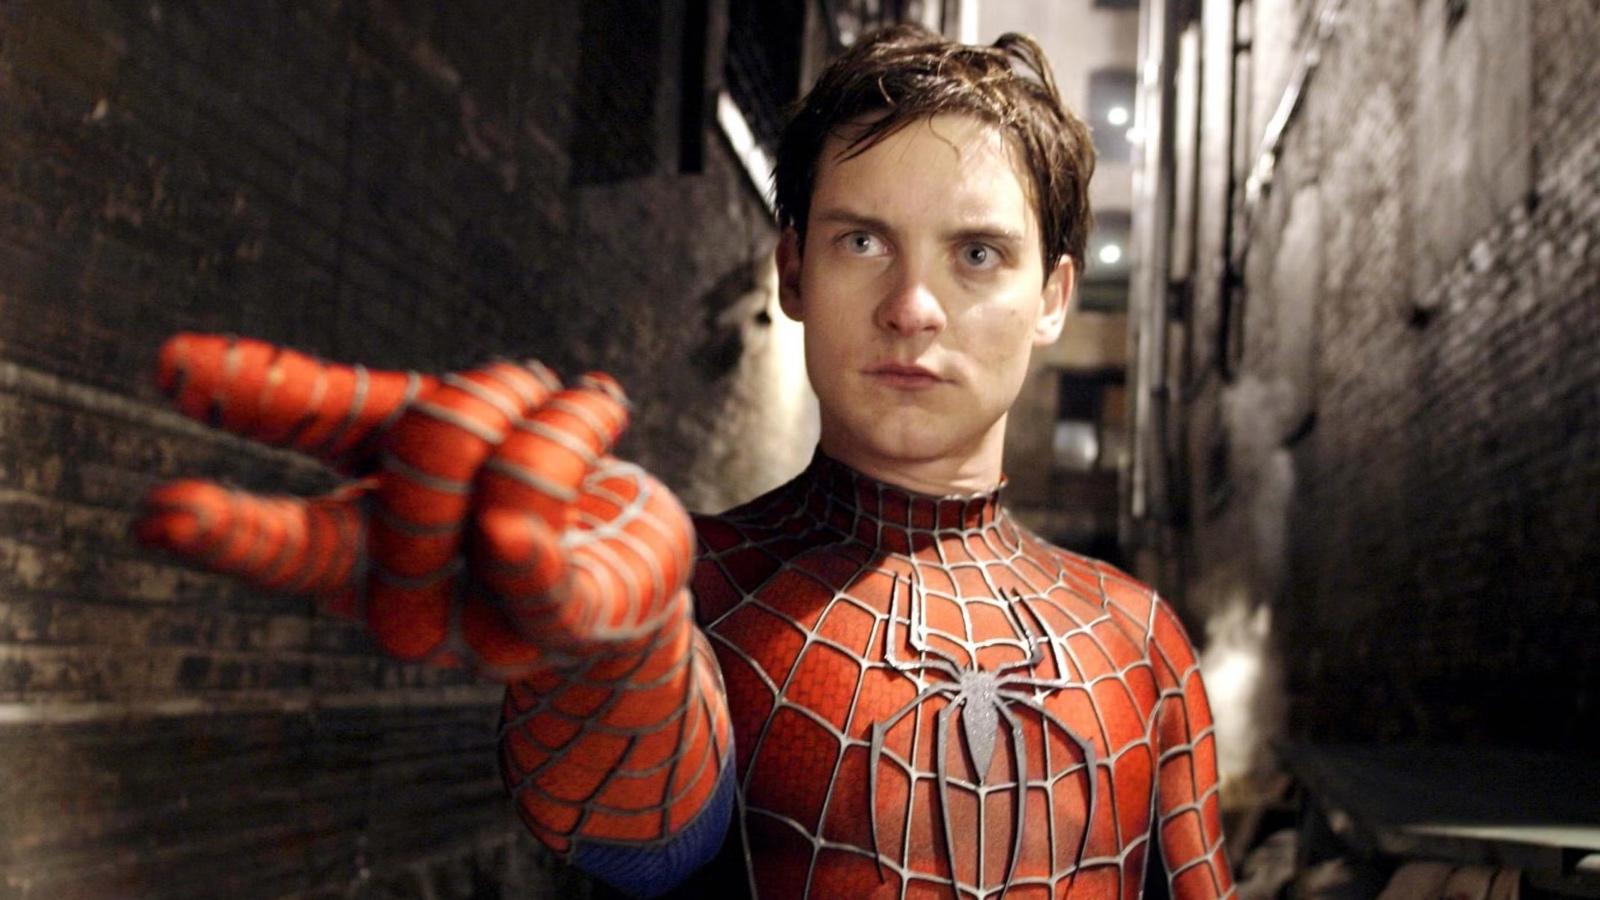 Tobey Maguire in Spider-Man 2002 as Peter Parker